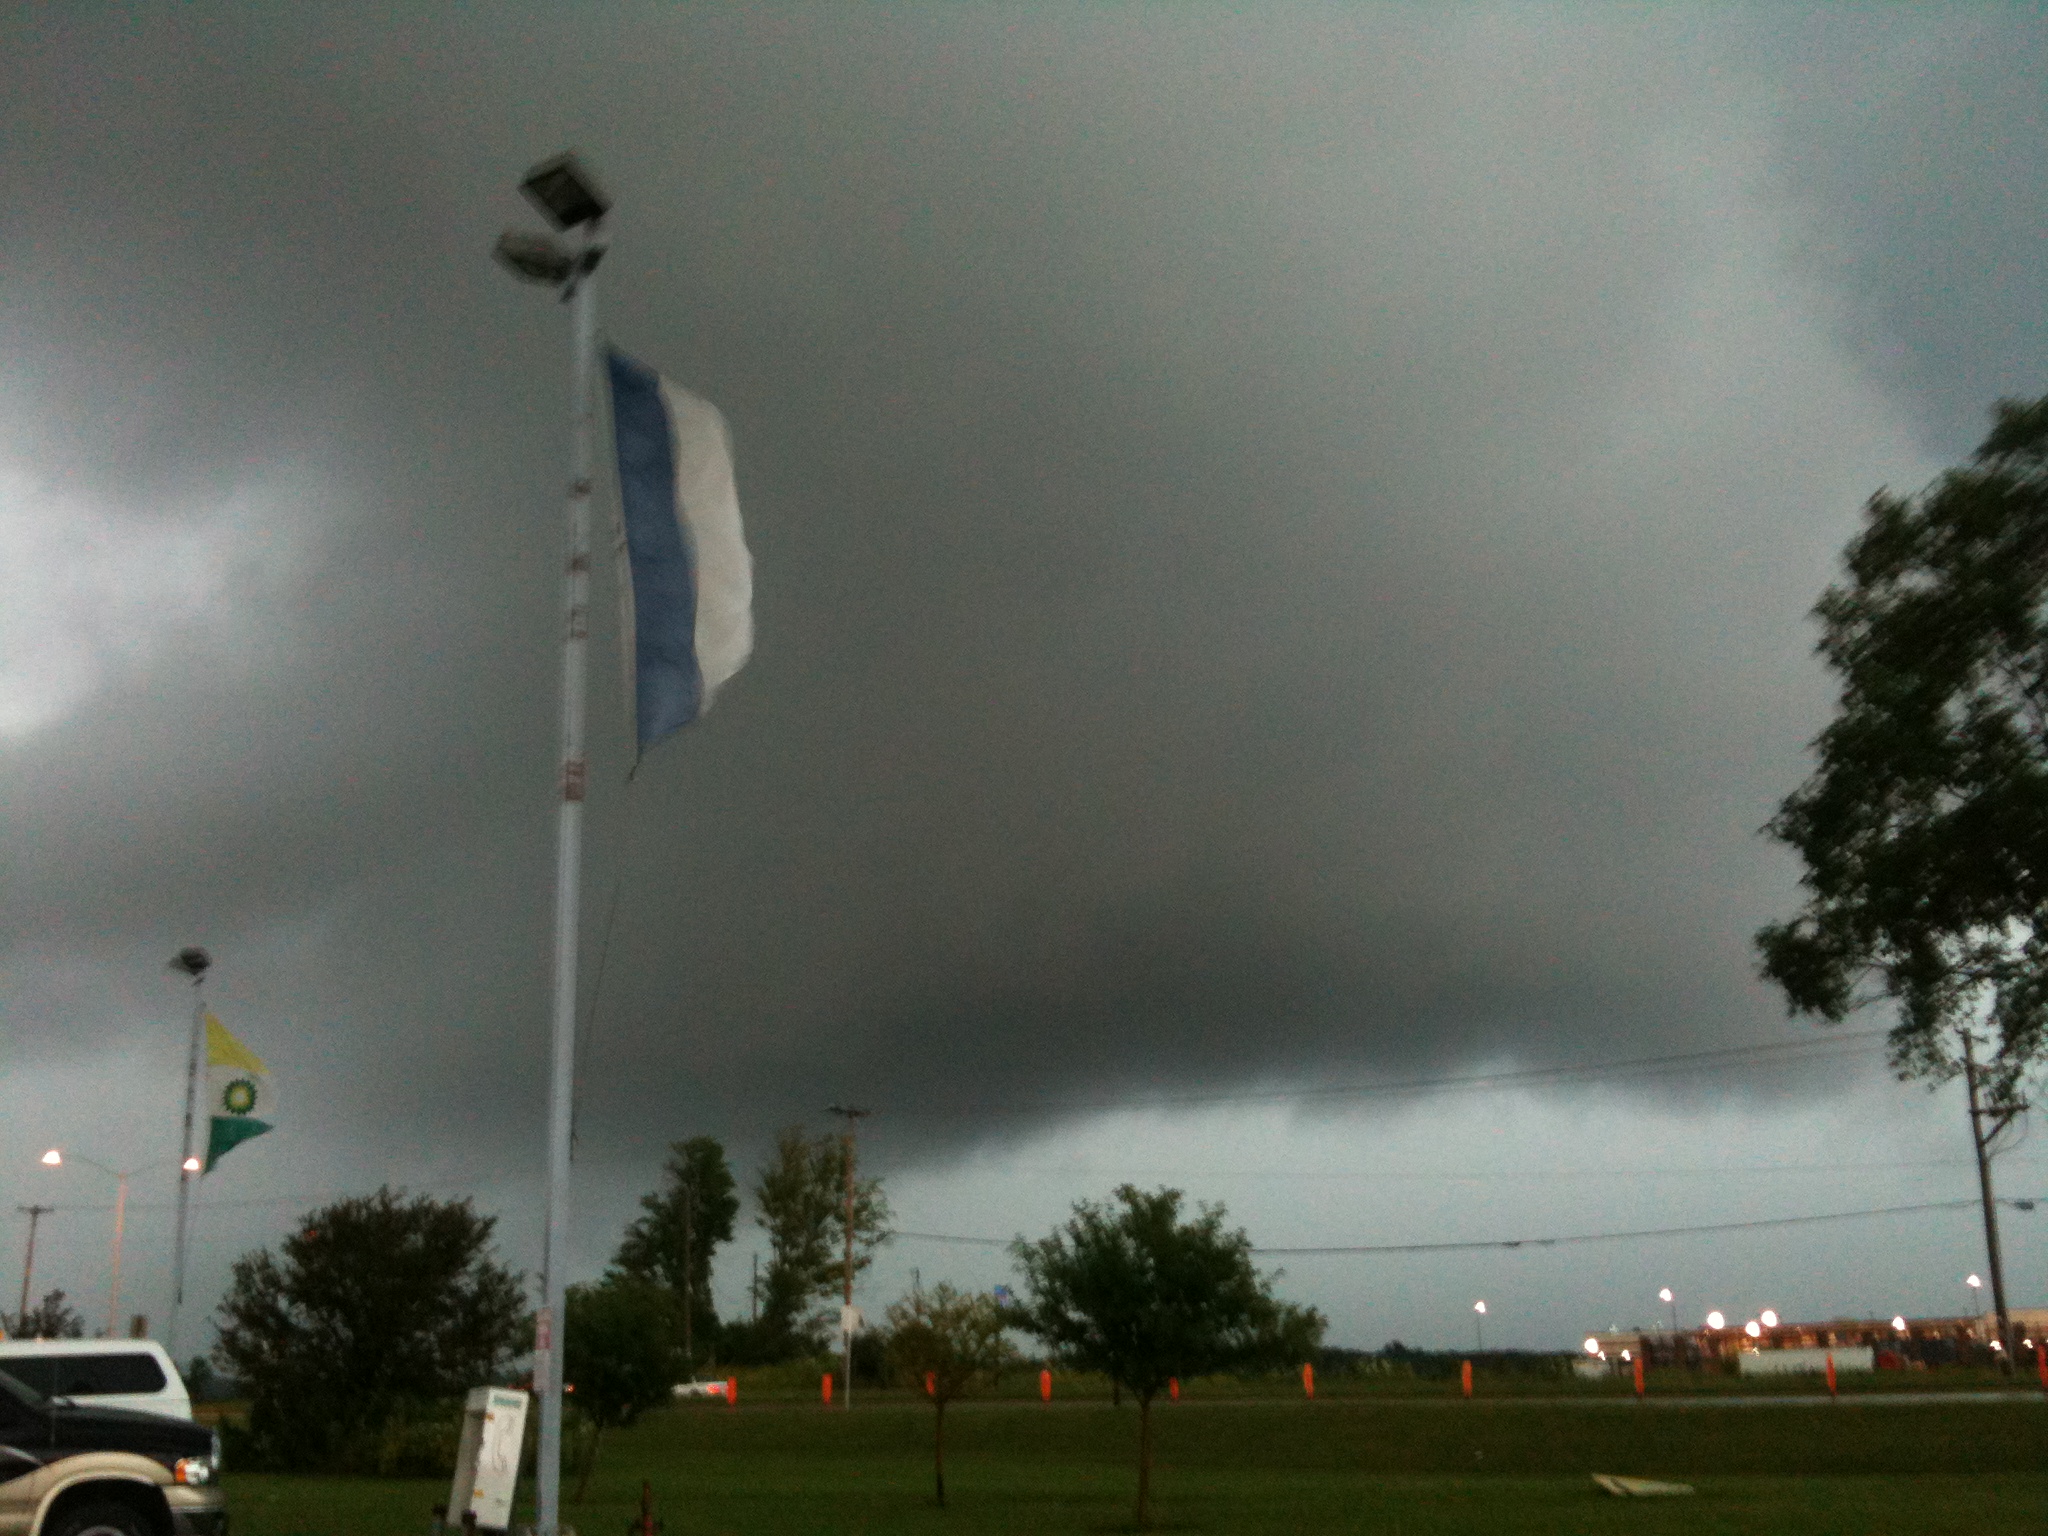 Wall Cloud passing overhead in Mukwonago moments before producing the EF-2 Tornado in Big Bend, Wisconsin.